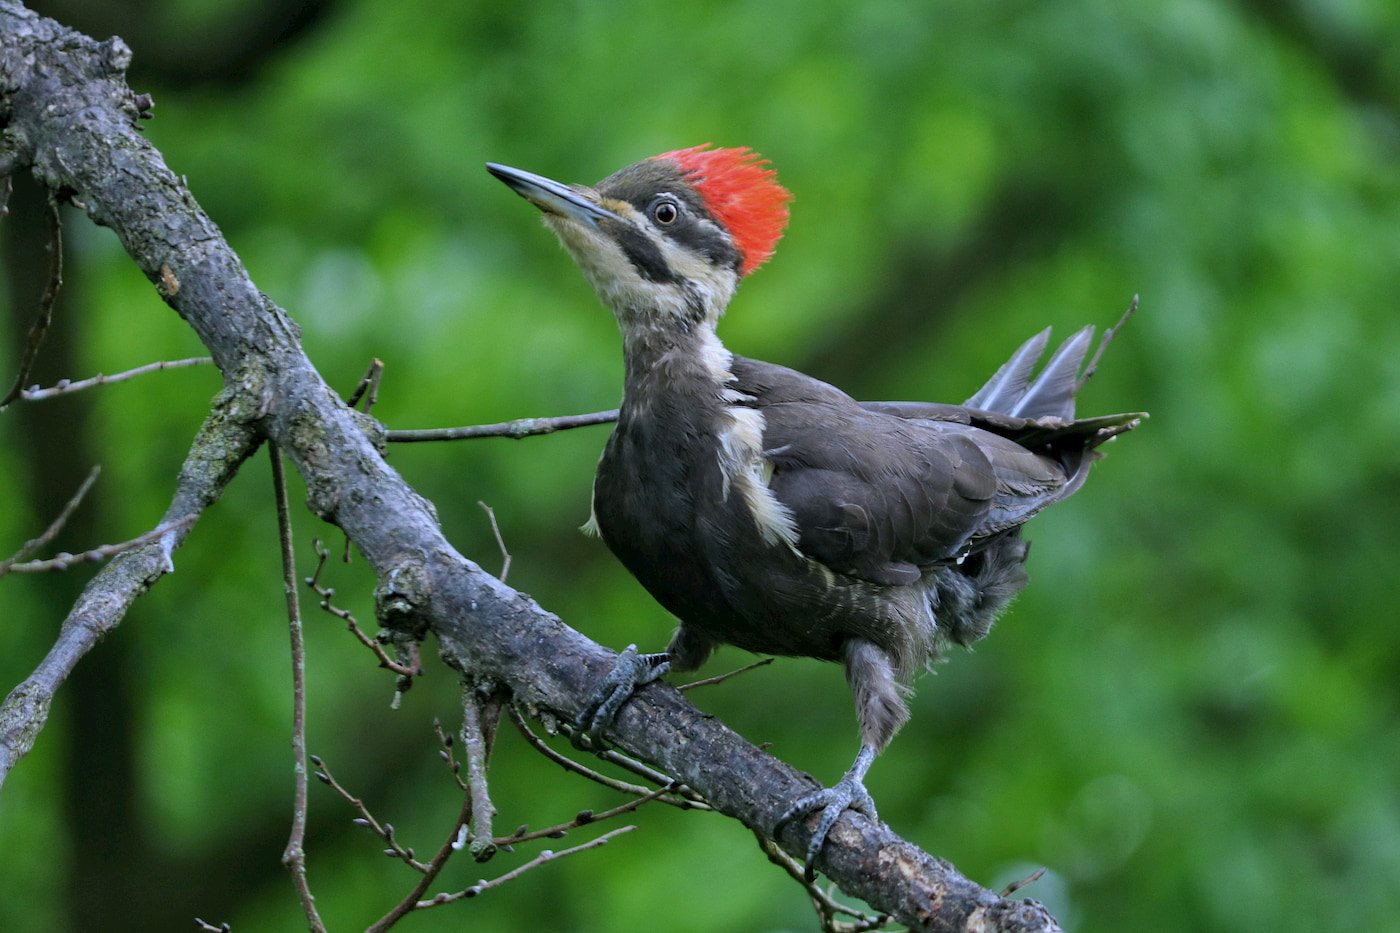 Pileated woodpecker. Photo by Mark Moschell, Flickr Creative Commons.